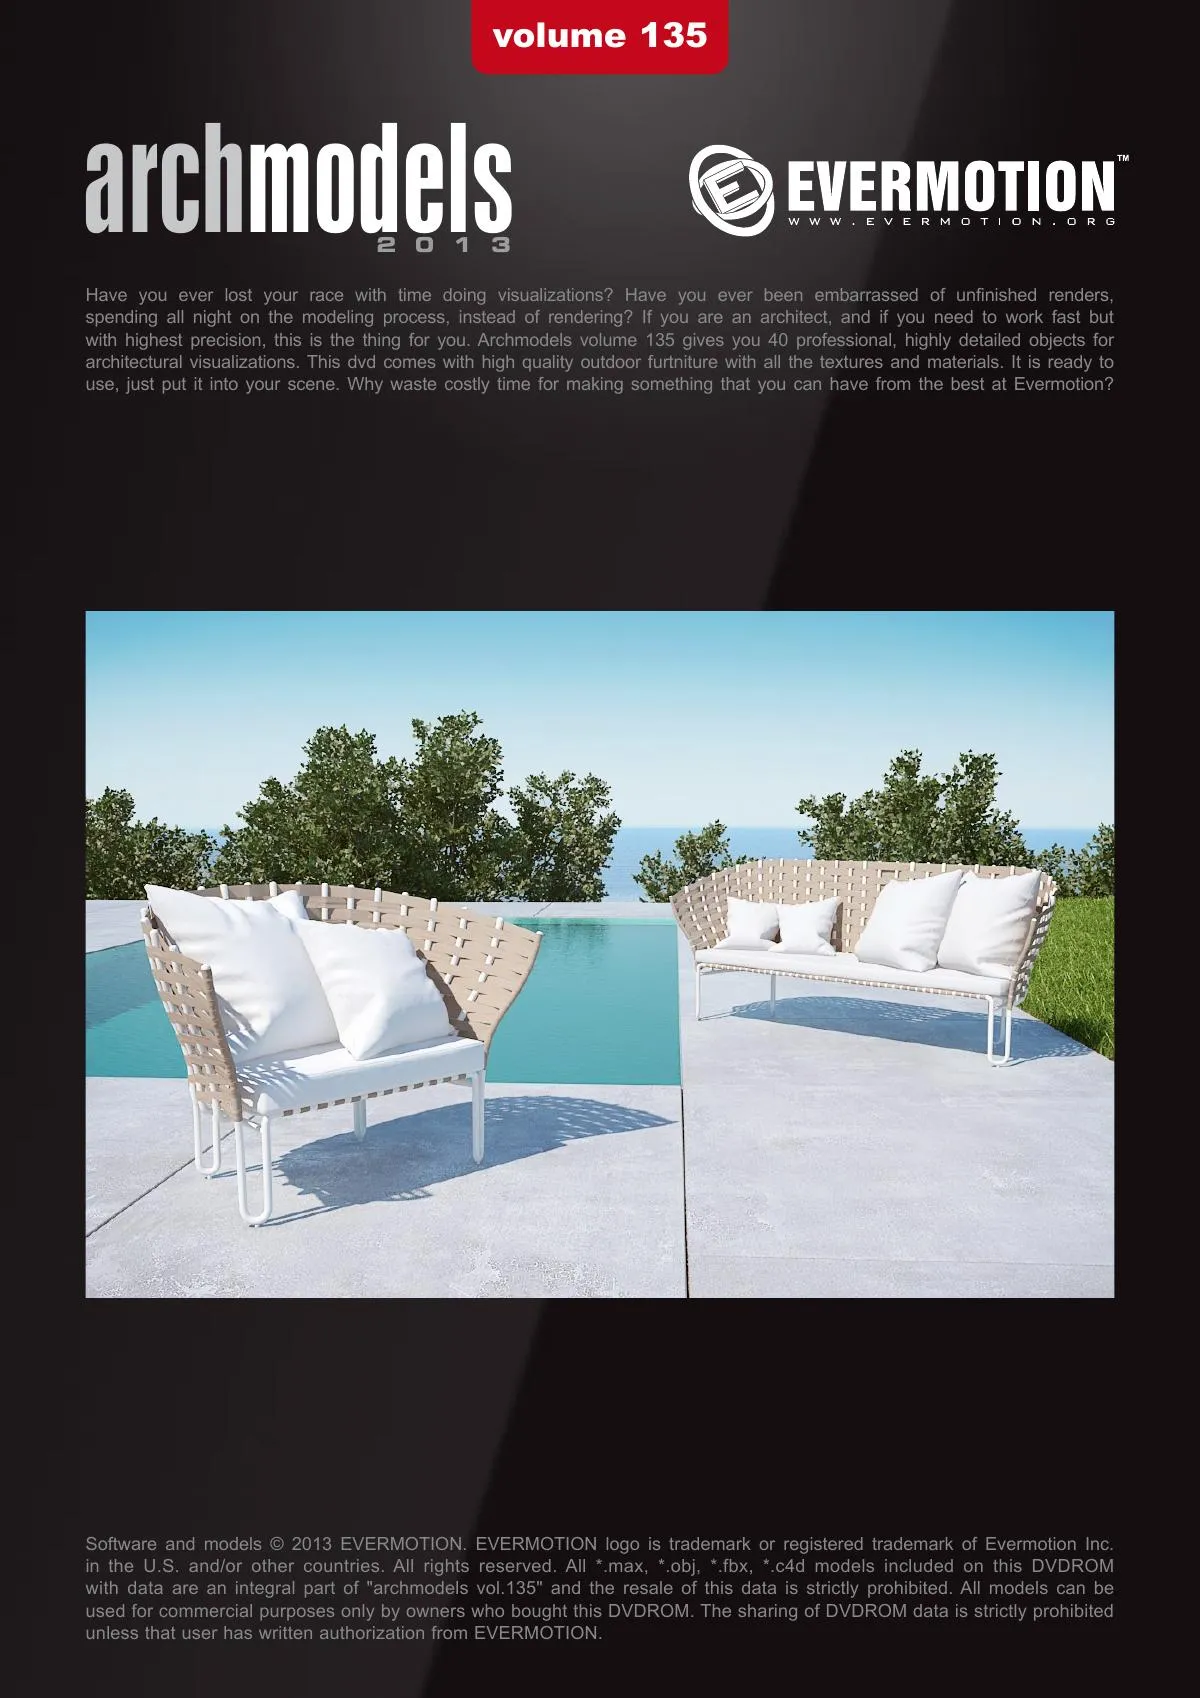 Evermotion Archmodels Vol 135 [outdoor sofa chair]